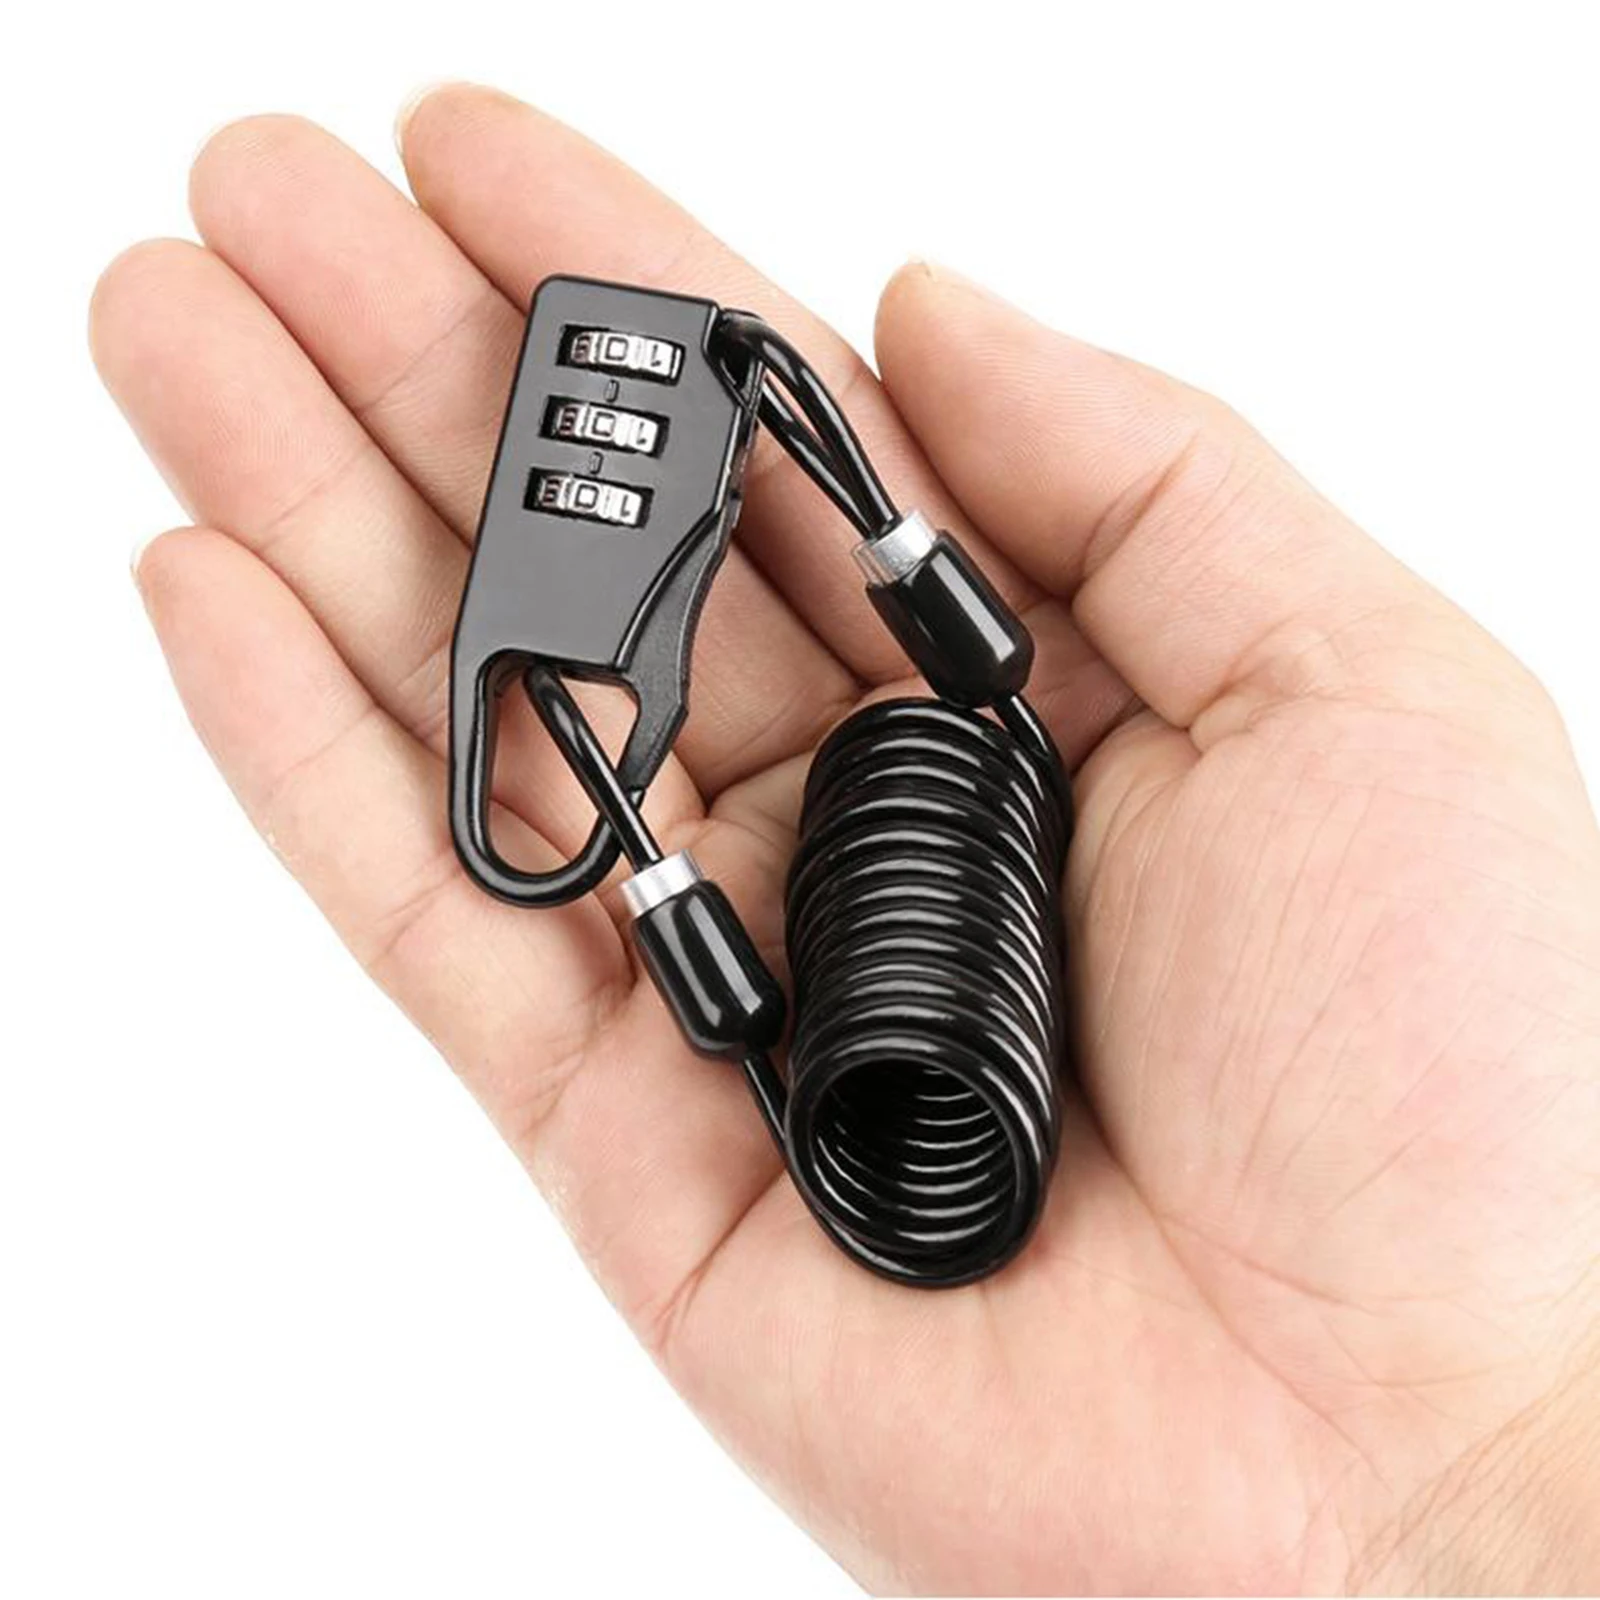 Lock, Anti-theft Combination PIN Lock & Cable, Portable And Lightweight But Strong